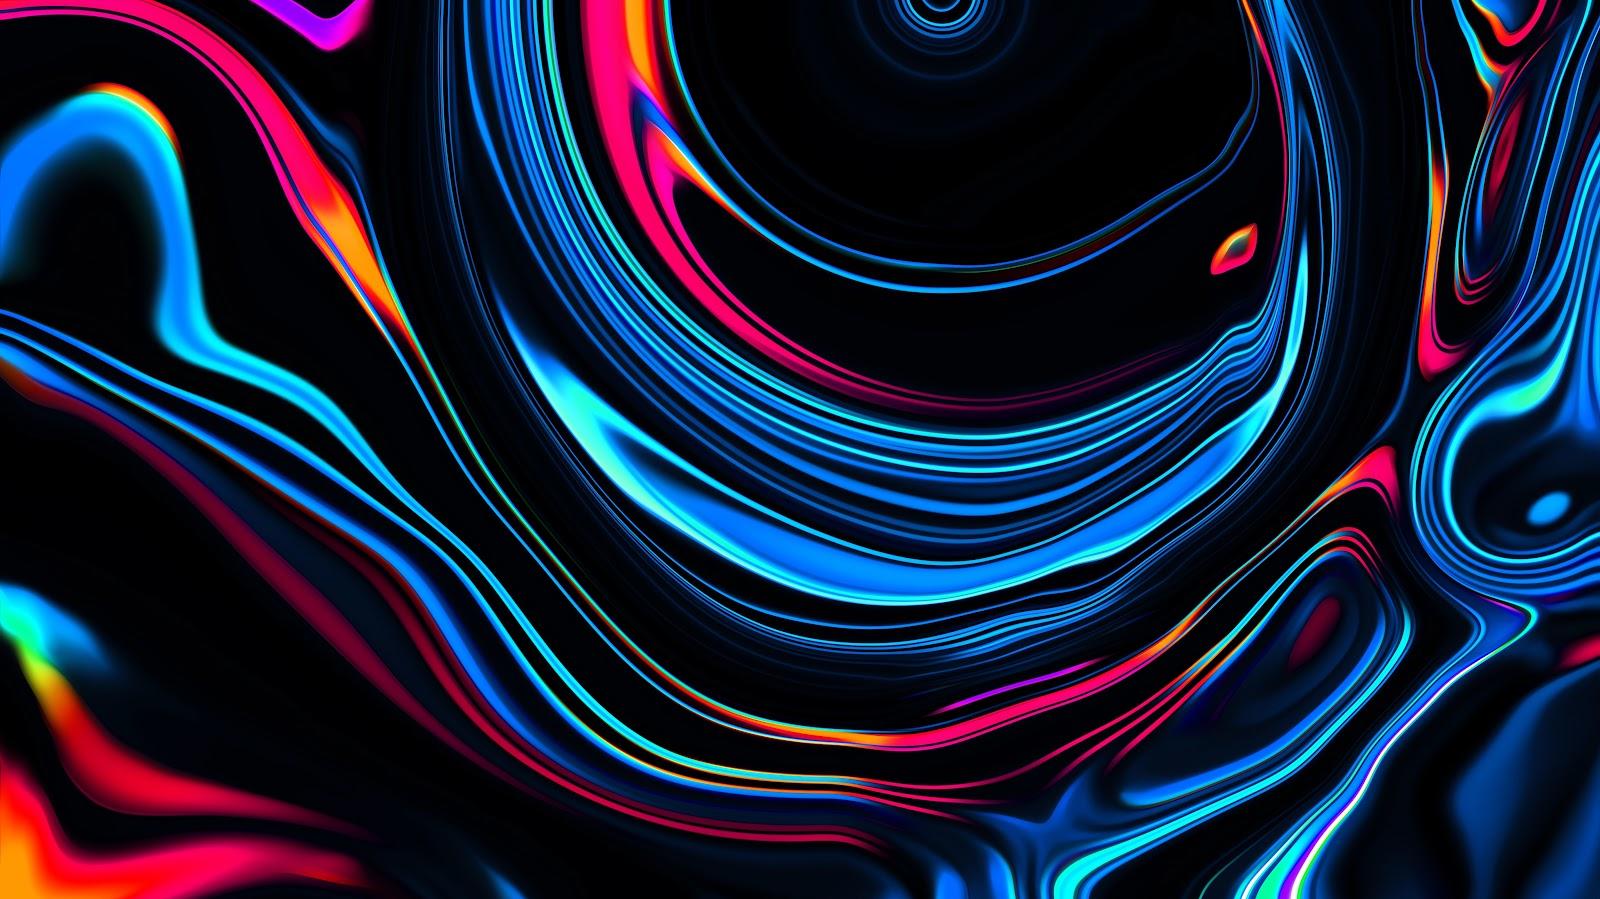 🔥 Download Pc Wallpaper 4k Cool Abstract Design by @lporter | Cool 4k ...